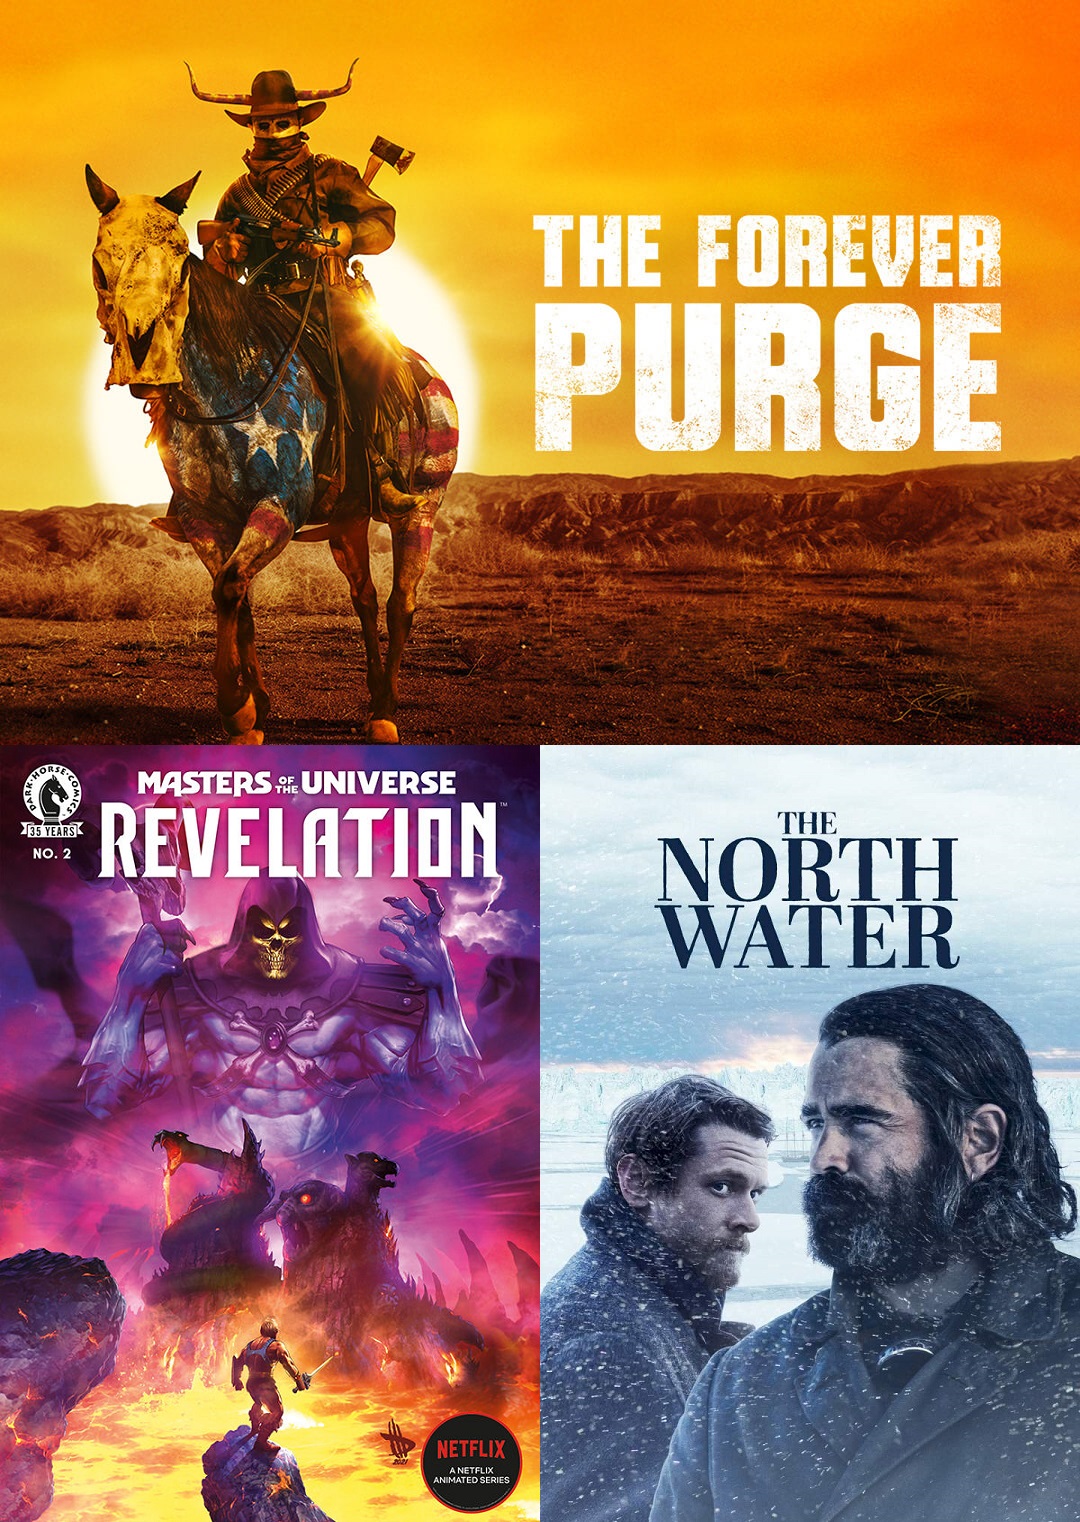 Podcast Episode 07 – The Forever Purge, Masters of the Universe – Revelation, The North Water